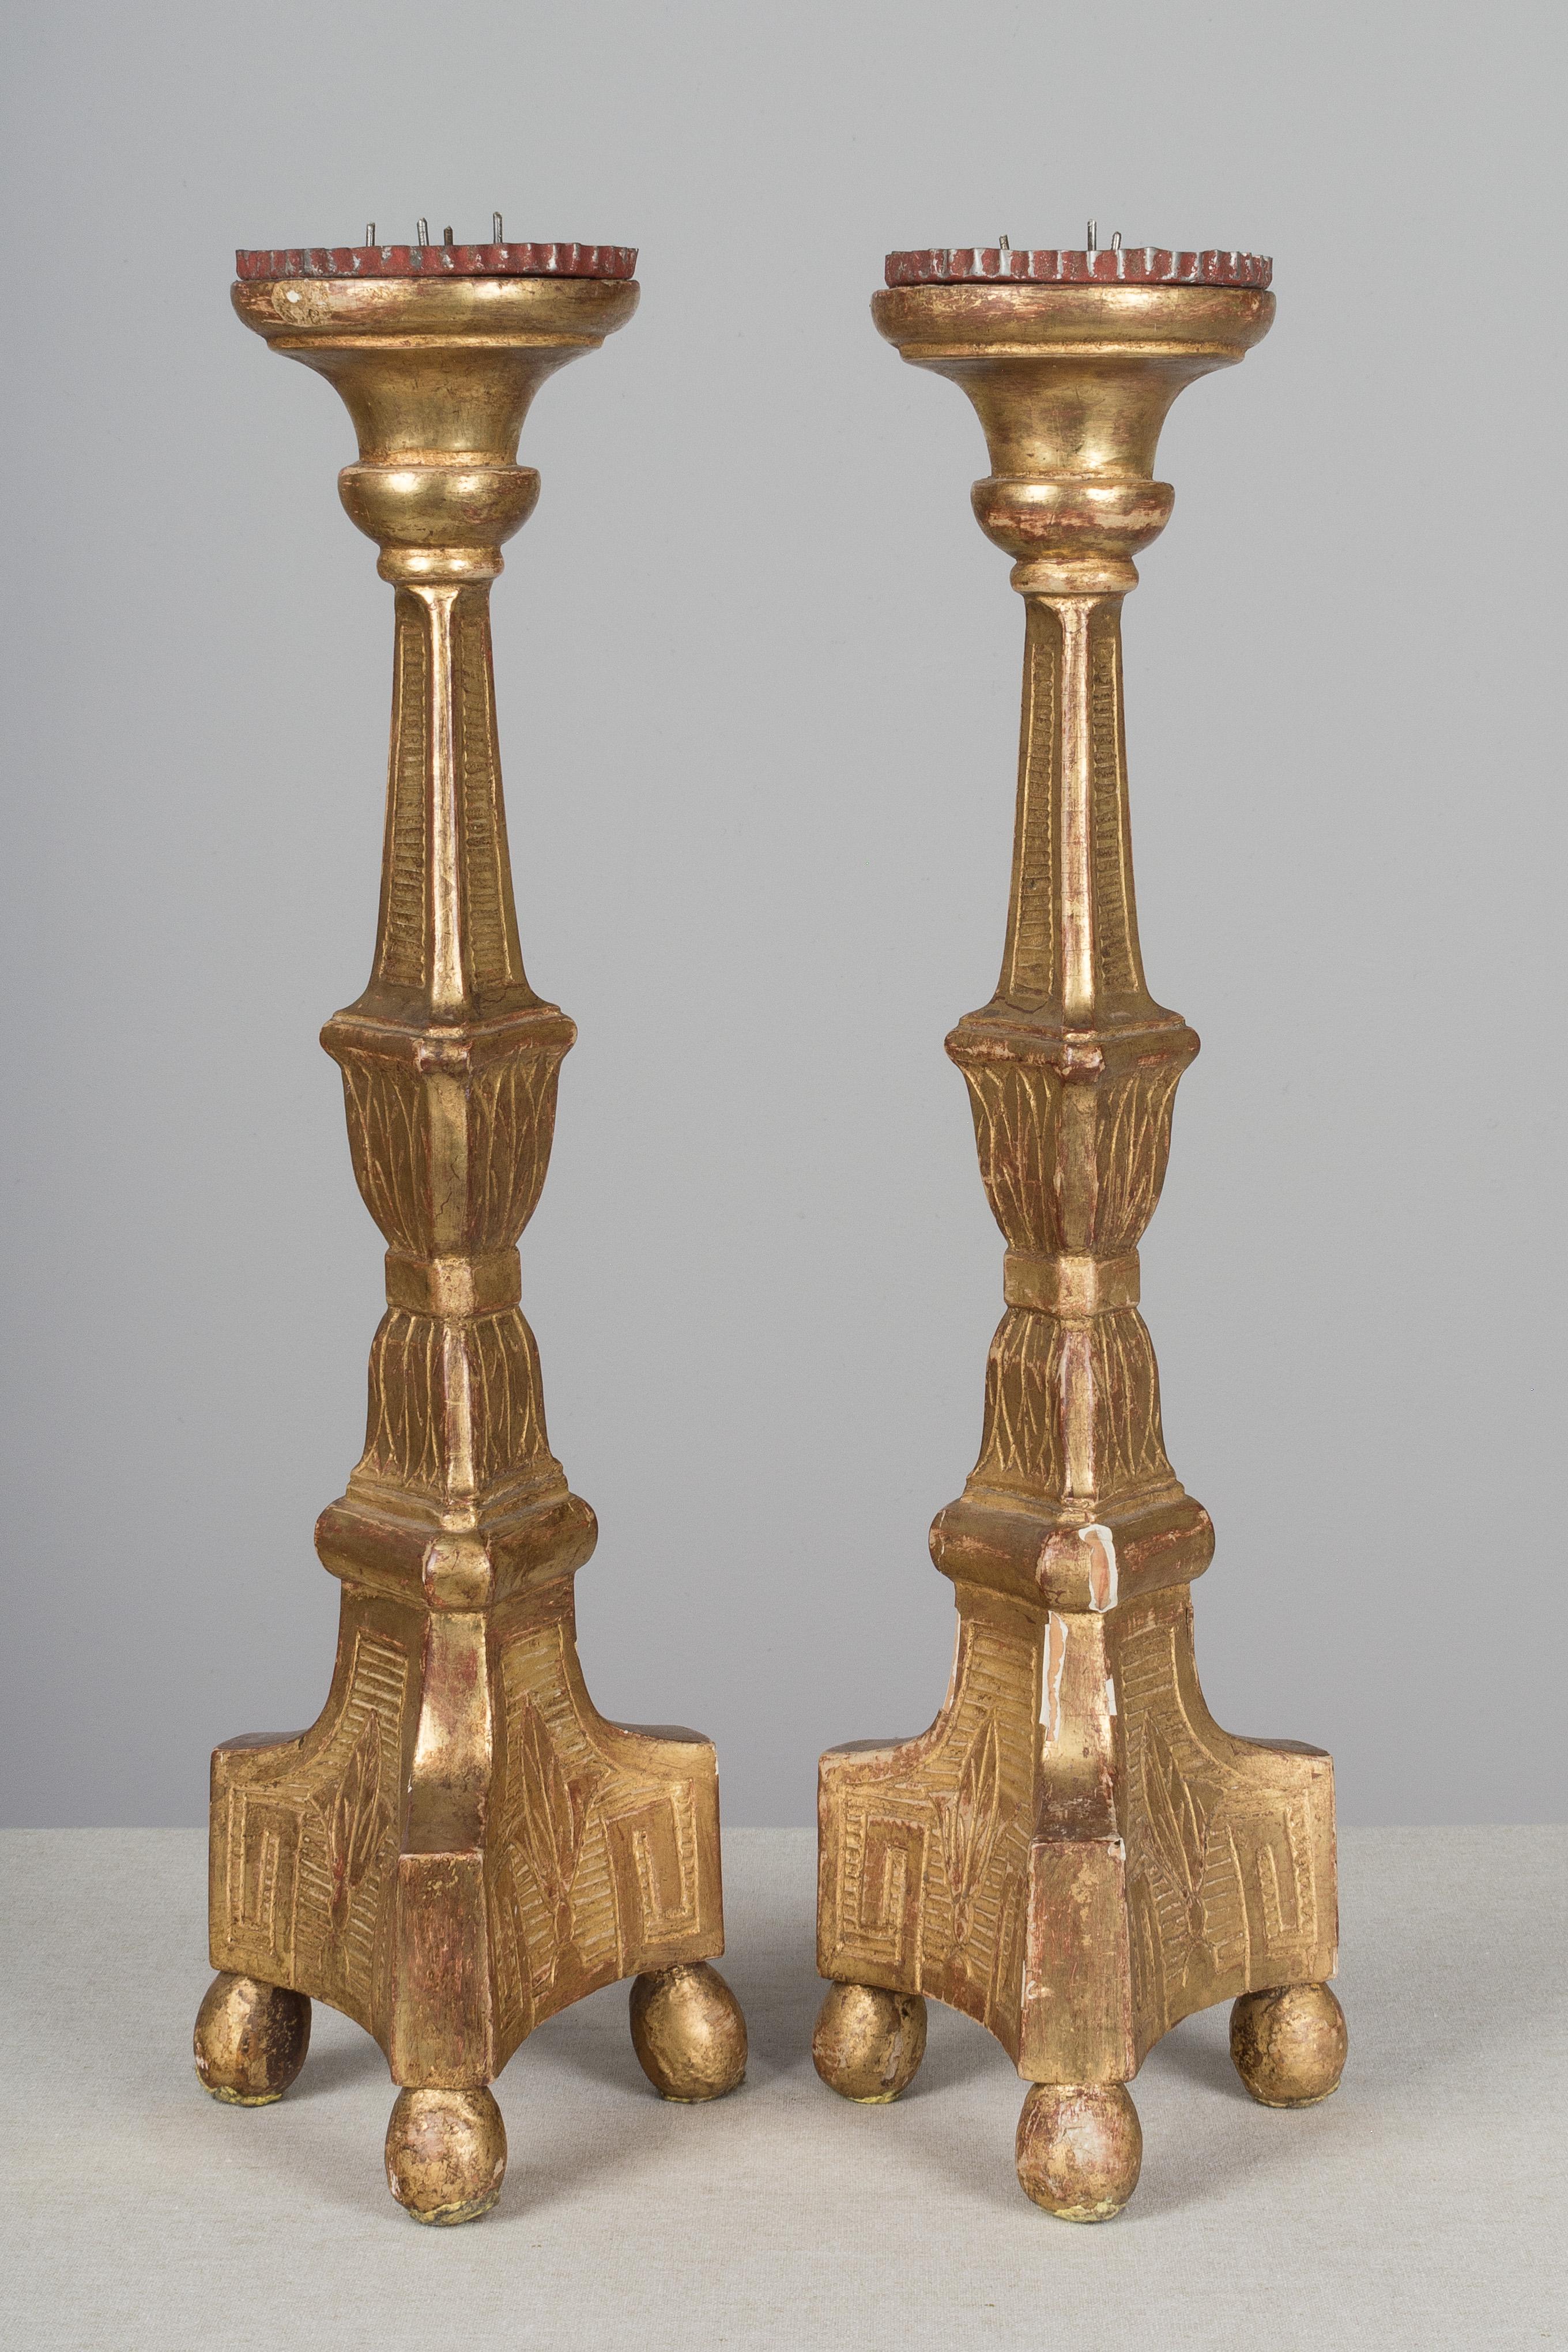 Pair of 19th Century French Candlesticks (Barock)